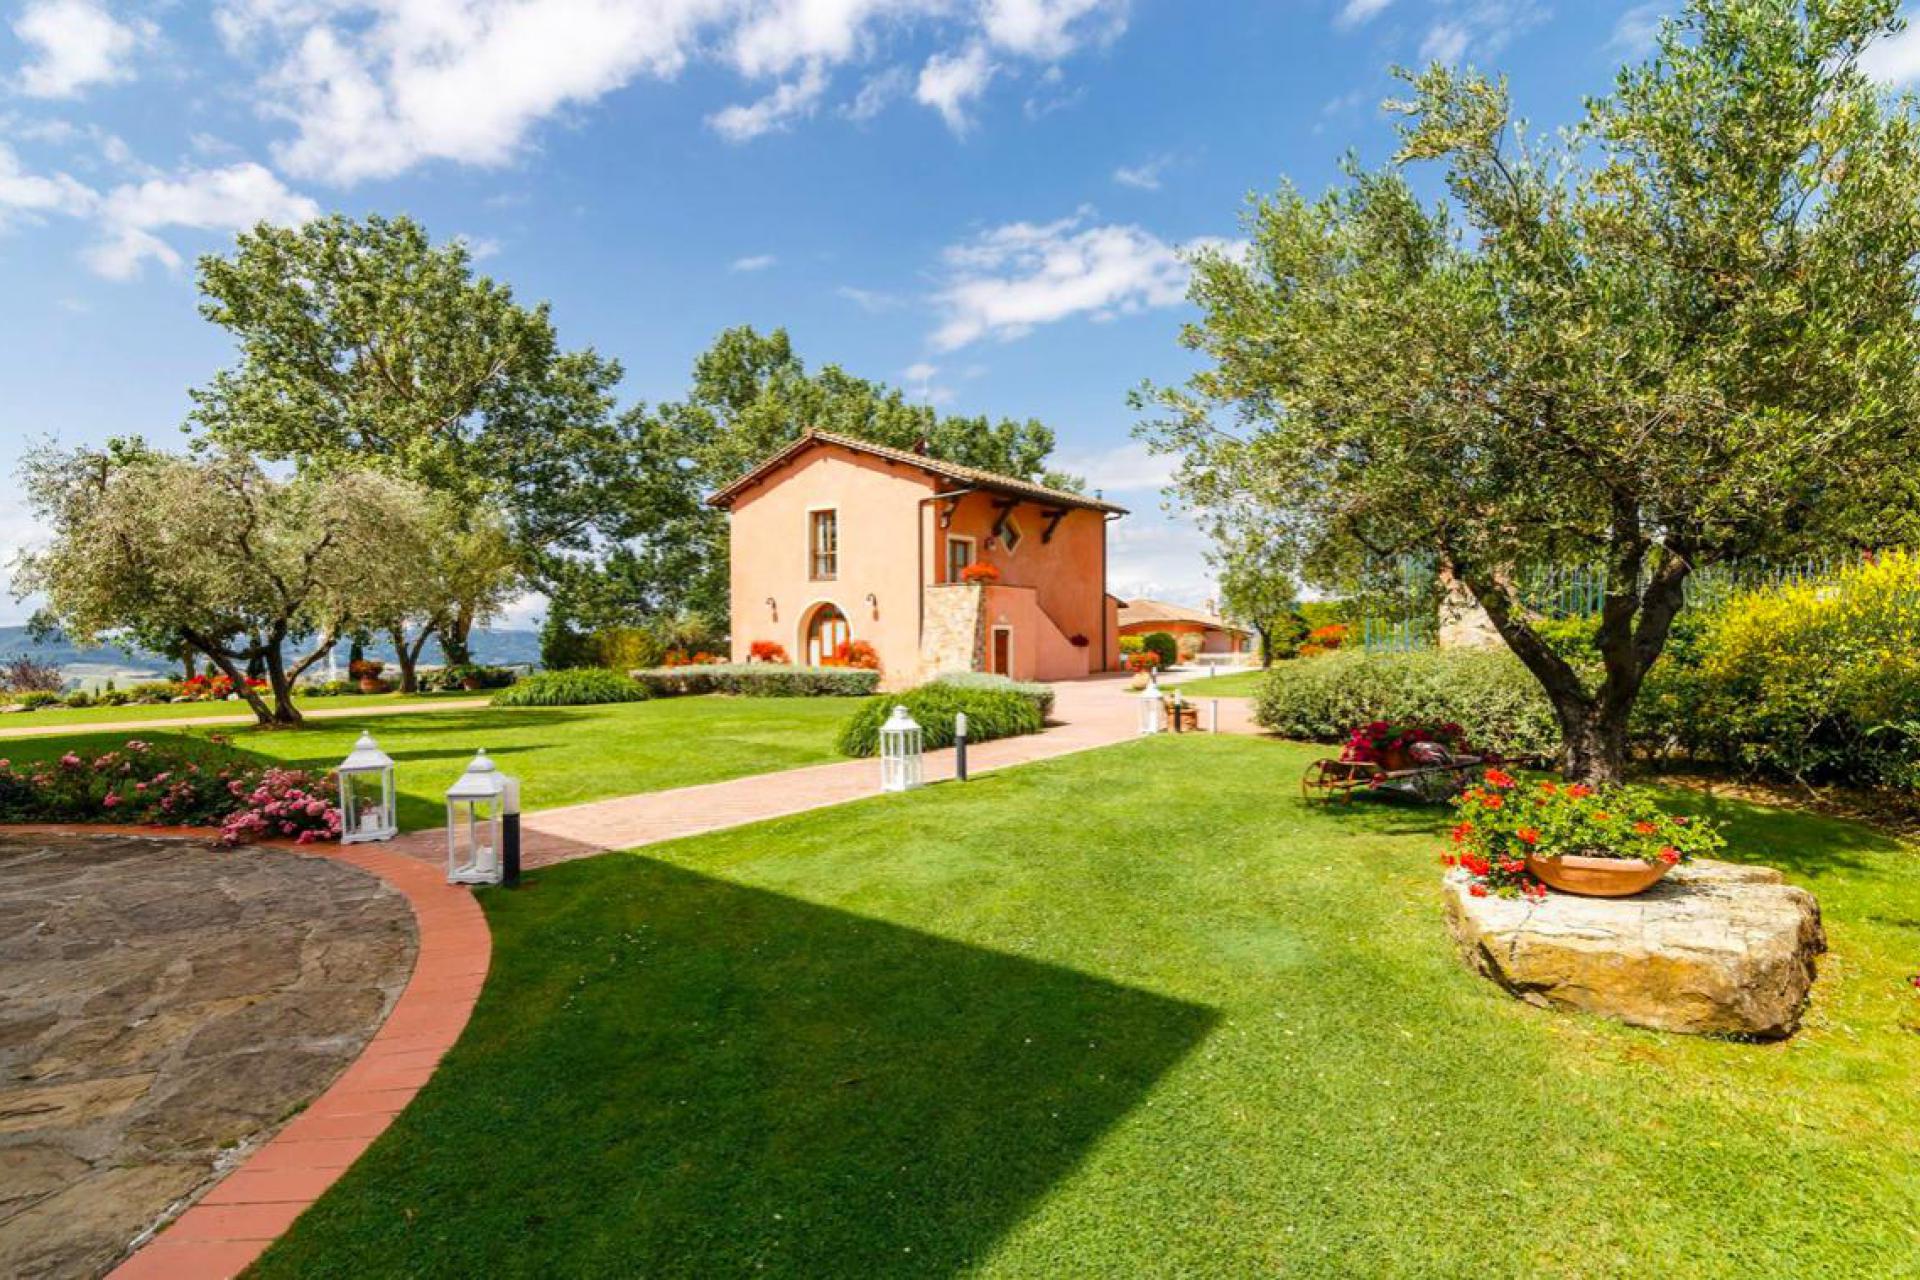 Agriturismo Tuscany Large agriturismo in Tuscany with stunning views